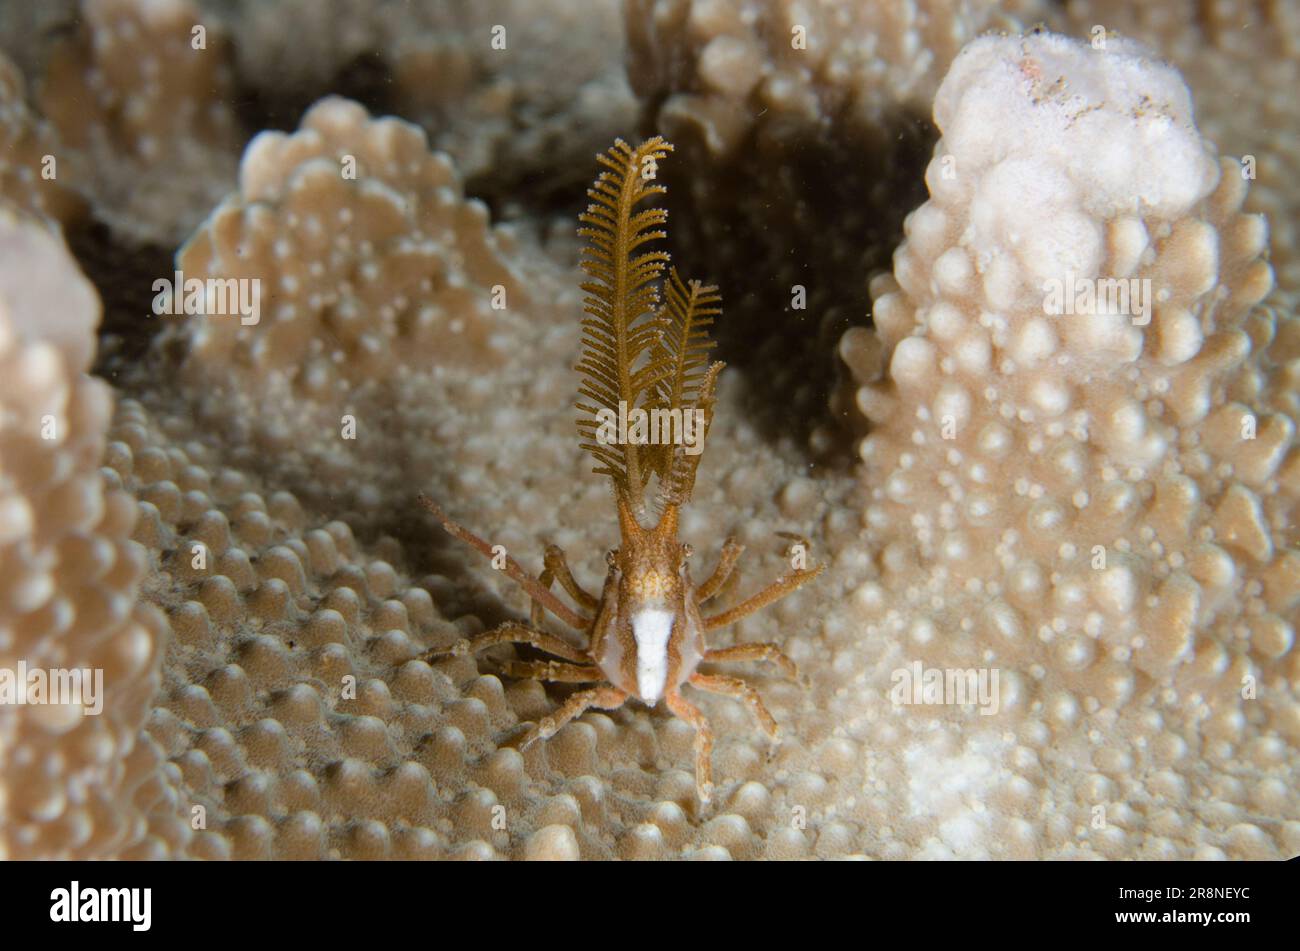 Bull Decorator Crab, Naxioides taurus, with pieces of Hydroid, Hydrozoa Class, night dive, Pyramids dive site, Amed, Karangasem Regency, Bali, Indones Stock Photo